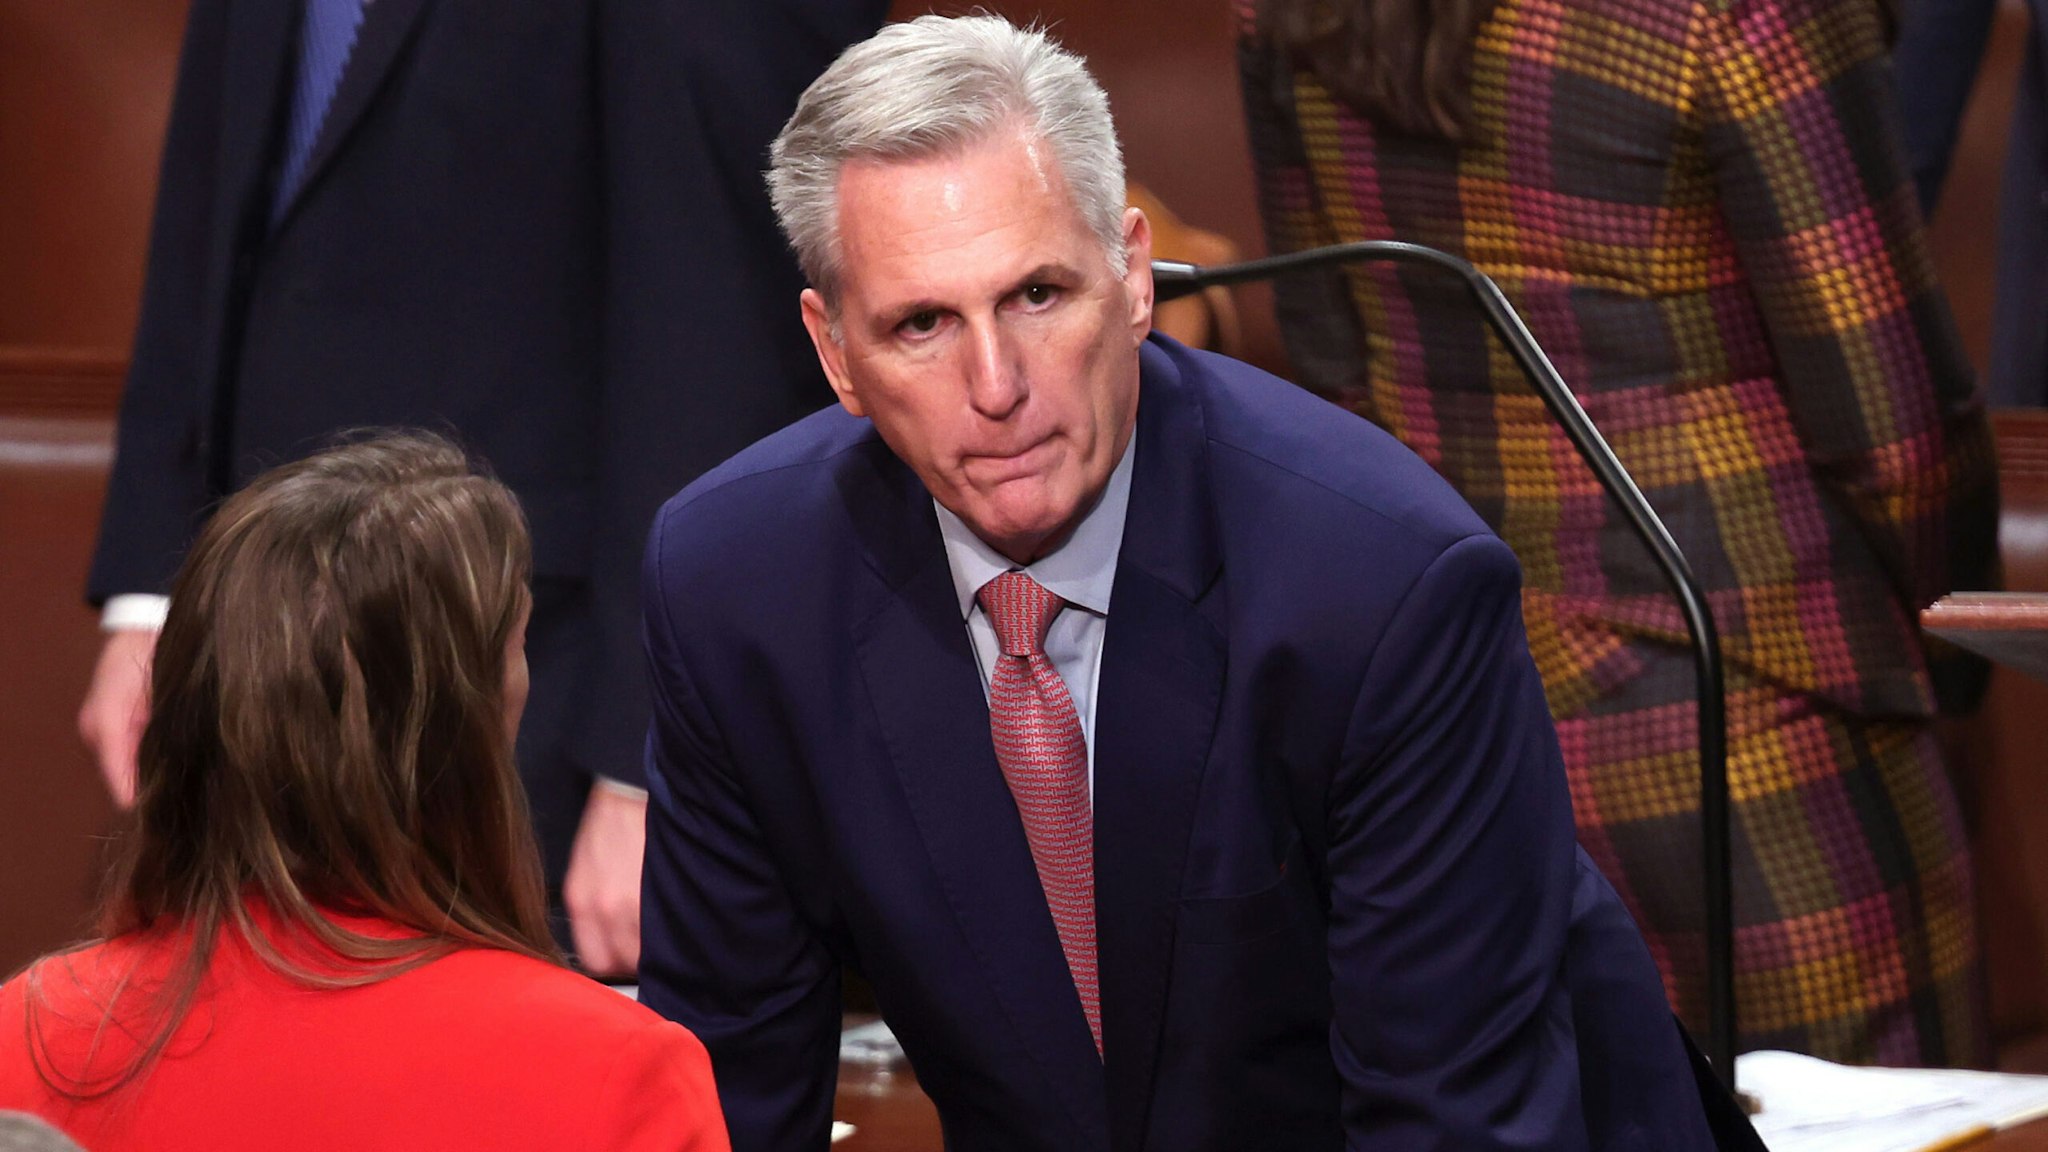 WASHINGTON, DC - JANUARY 03: U.S. House Minority Leader Kevin McCarthy (R-CA) (C) talks to a colleague as Rep. Jim Jordan (R-OH) works behind him, as the House of Representatives cast their votes for Speaker of the House, on the first day of the 118th Congress in the House Chamber of the U.S. Capitol Building on January 03, 2023 in Washington, DC. Today members of the 118th Congress will be sworn-in and the House of Representatives will elect a new Speaker of the House.